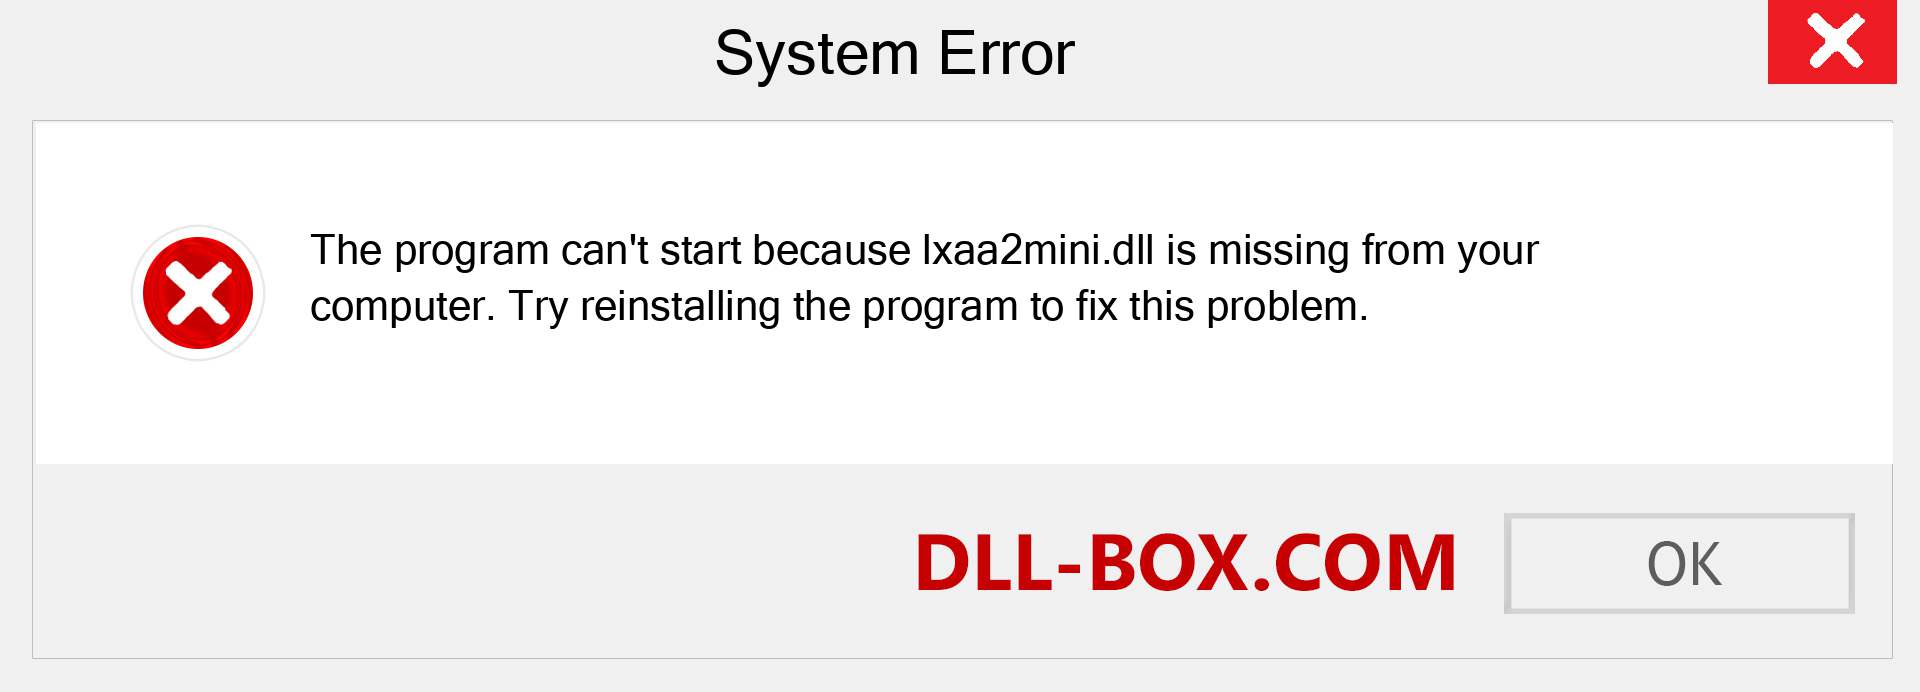  lxaa2mini.dll file is missing?. Download for Windows 7, 8, 10 - Fix  lxaa2mini dll Missing Error on Windows, photos, images